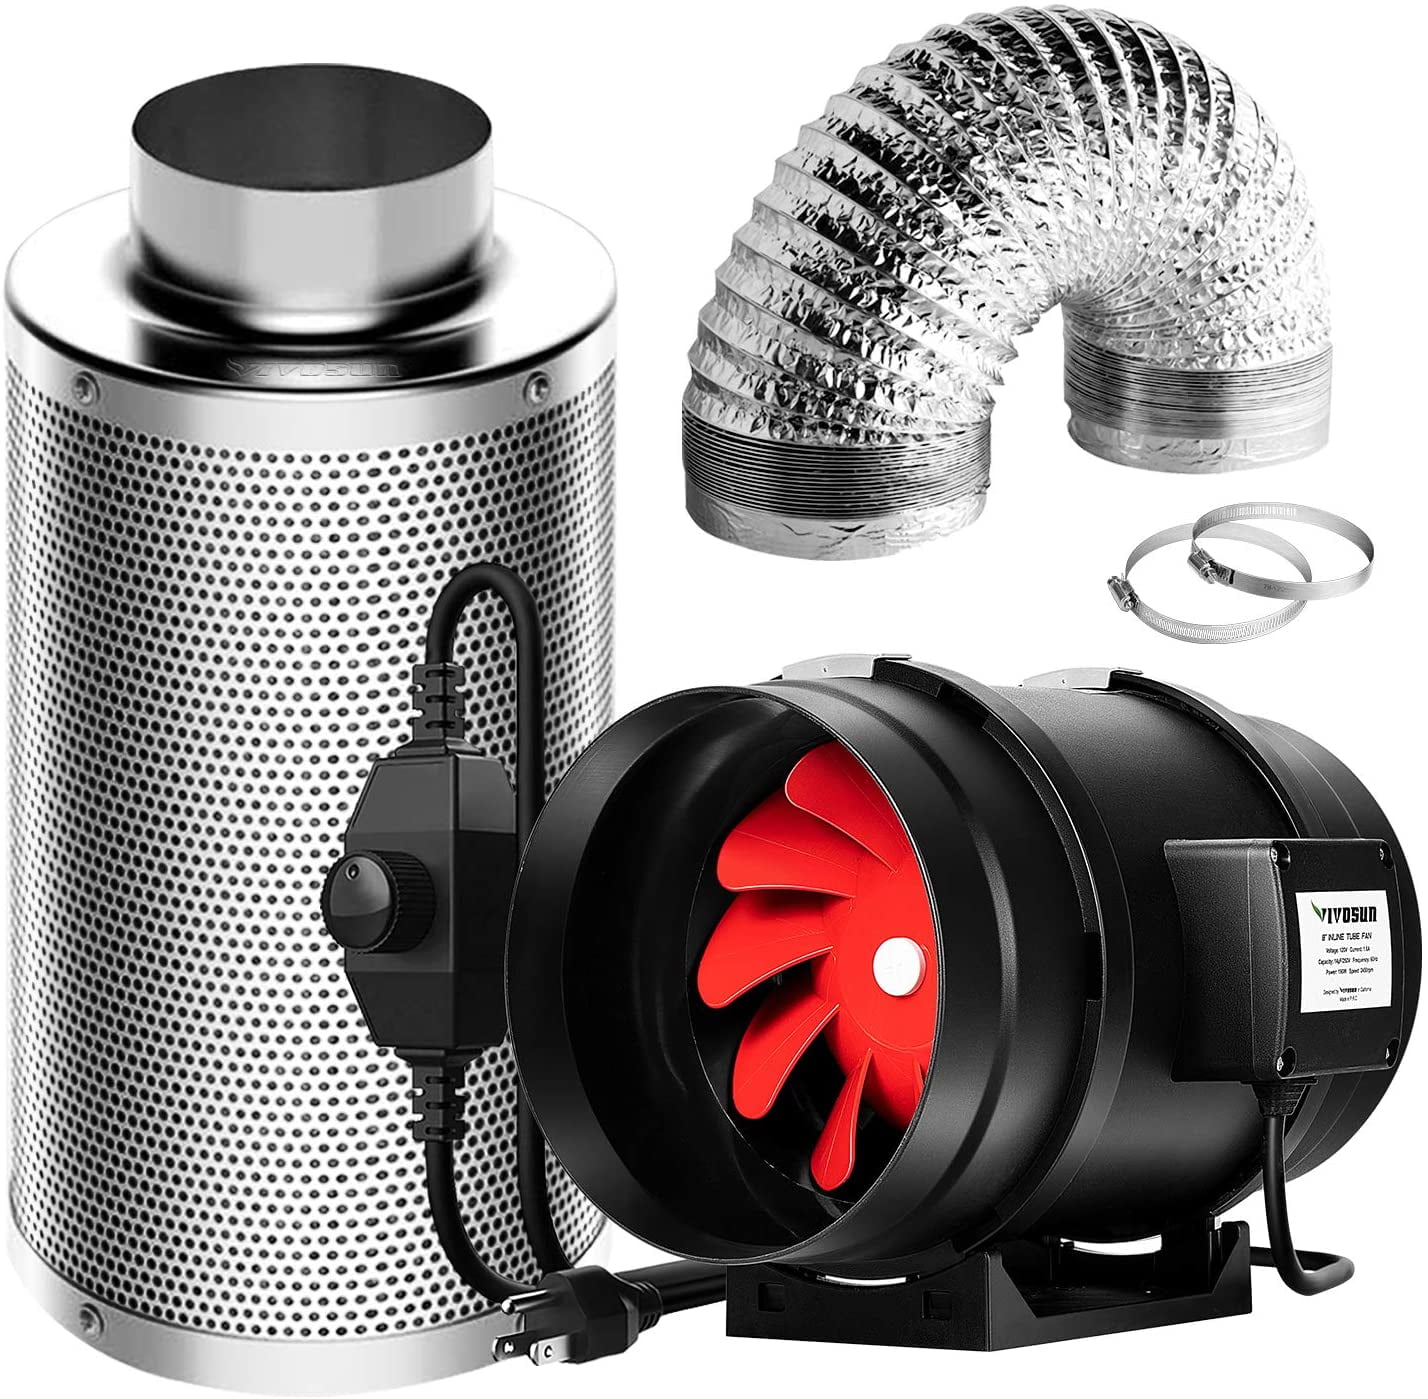 60" x 60" x 80" Grow Tent Kit 8" inch Inline Fan Carbon Filter Air Ducting Kit 